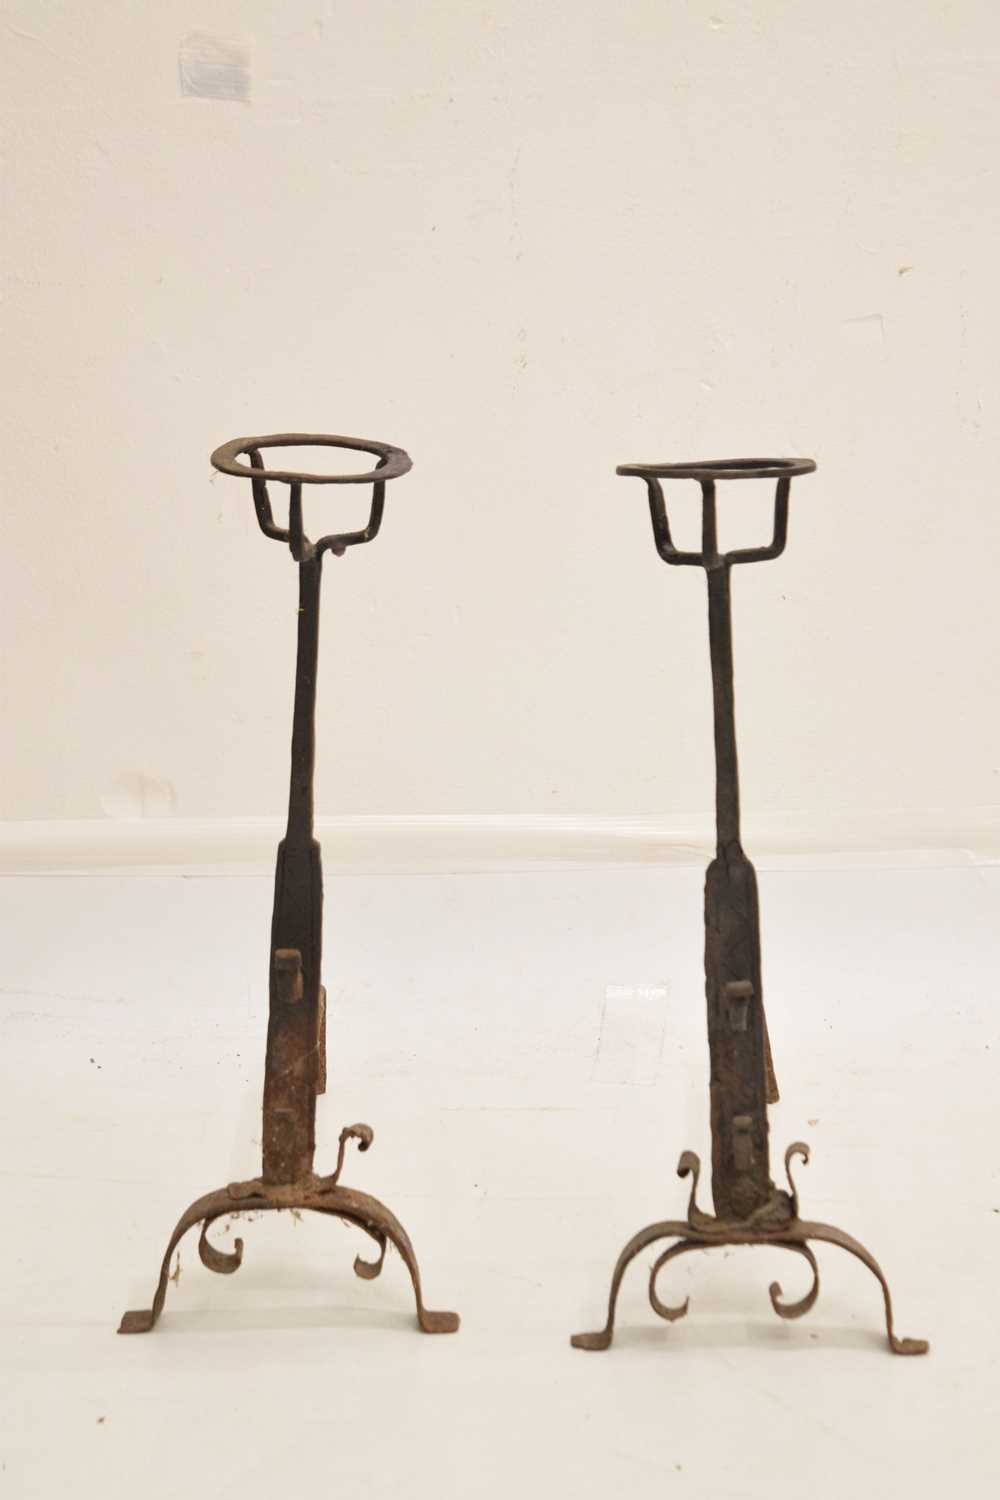 Pair of antique wrought iron cresset-top spit dogs - Image 2 of 3